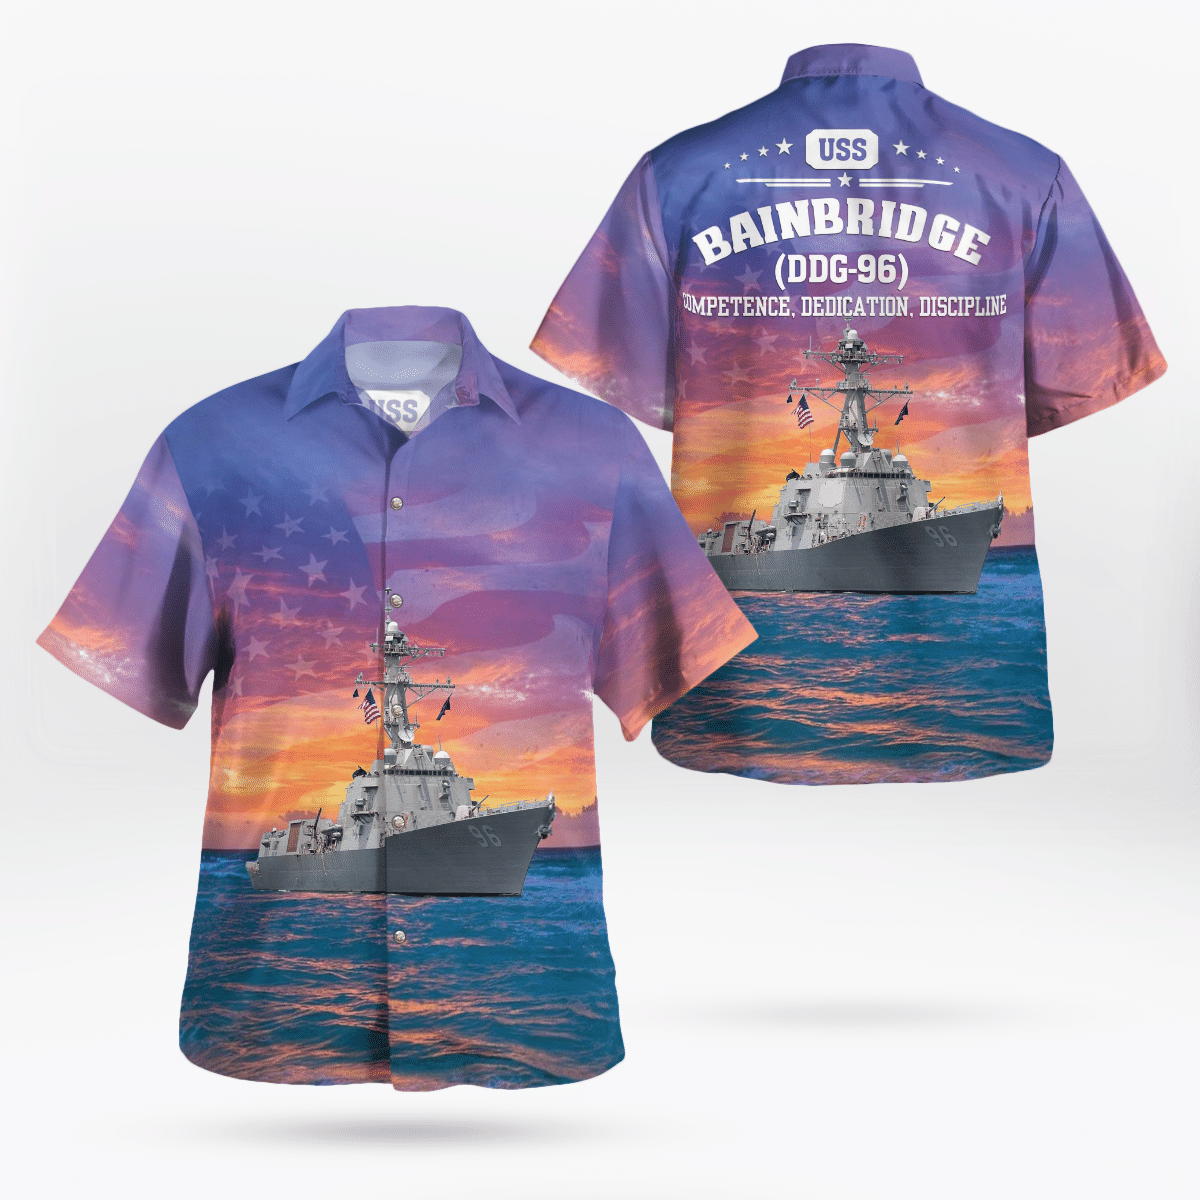 If you are in need of a new summertime look, pick up this Hawaiian shirt 4